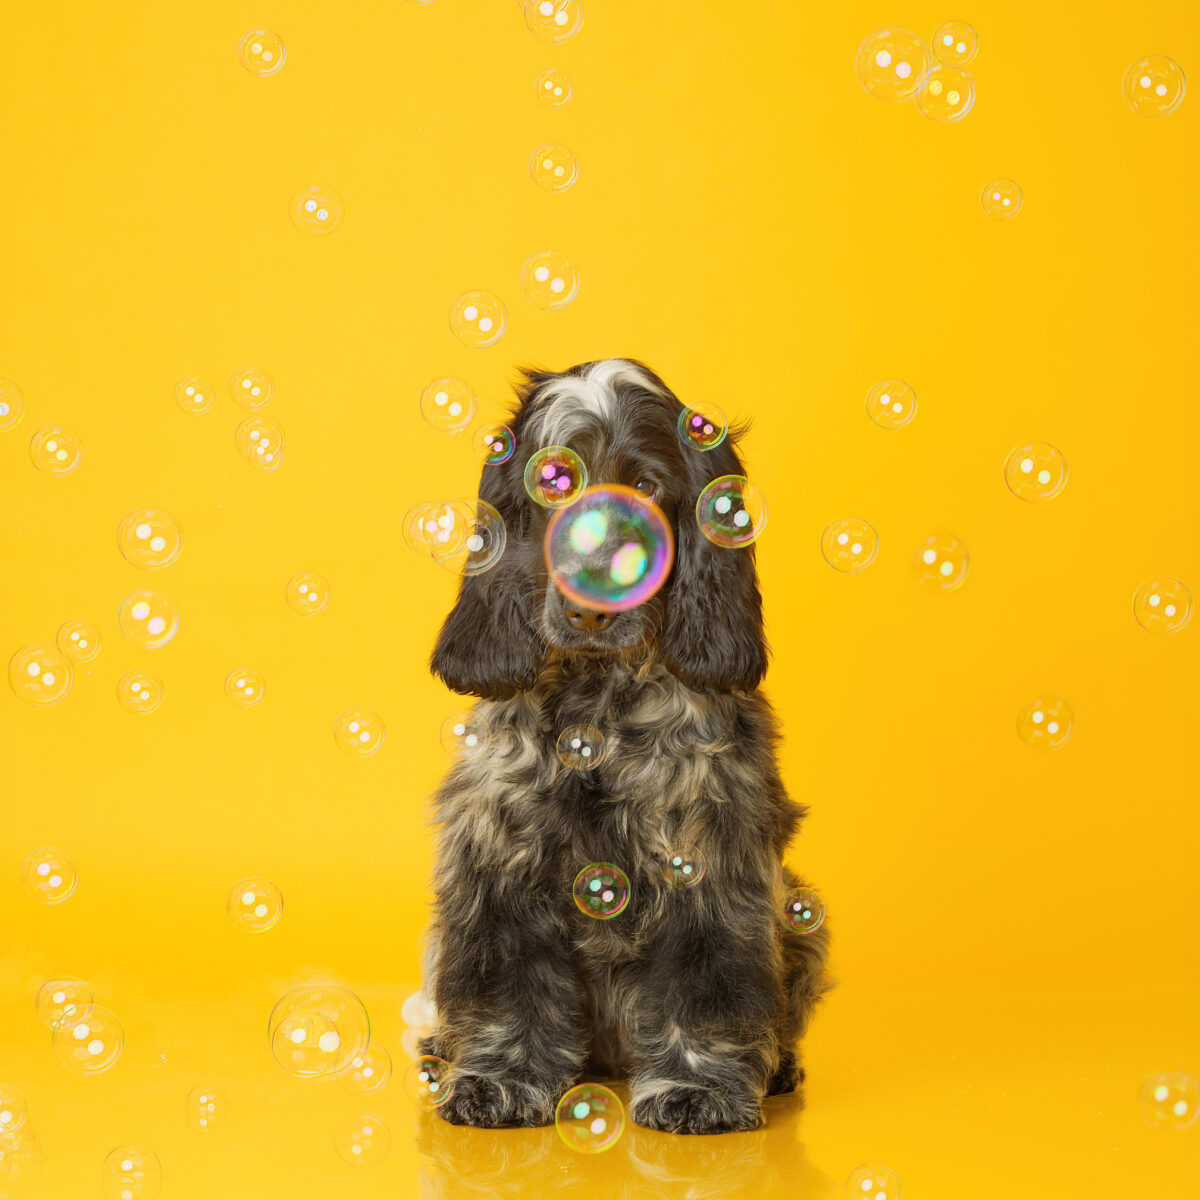 Professional pet photograph, taken by Northern Ireland's top pet photographer in Belfast of Blue spaniel on a yellow background with bubbles